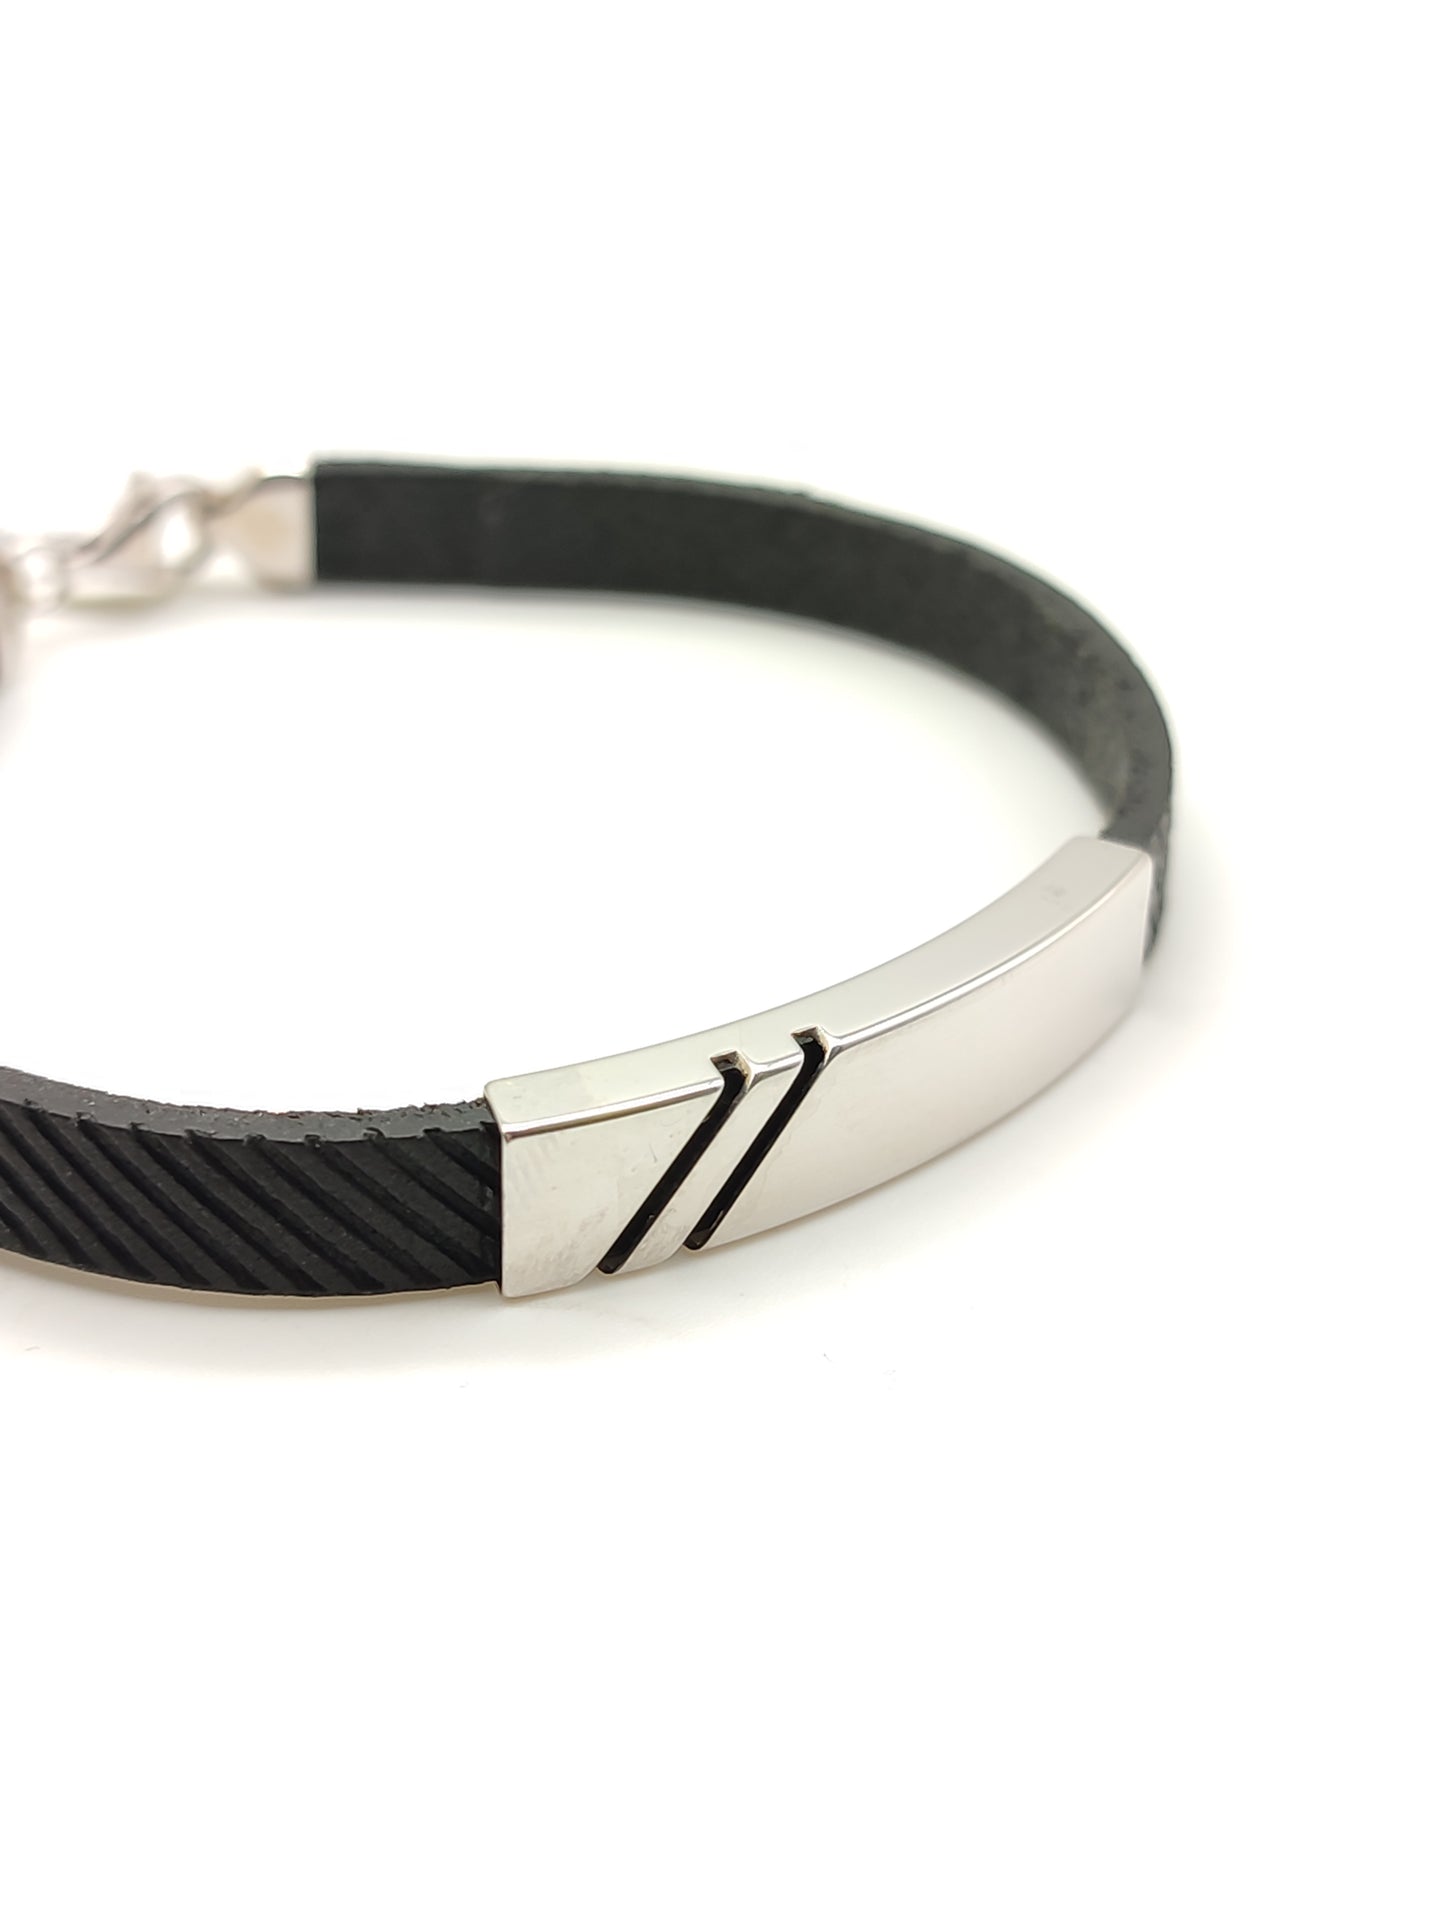 Silver and rubber bracelet with plaque